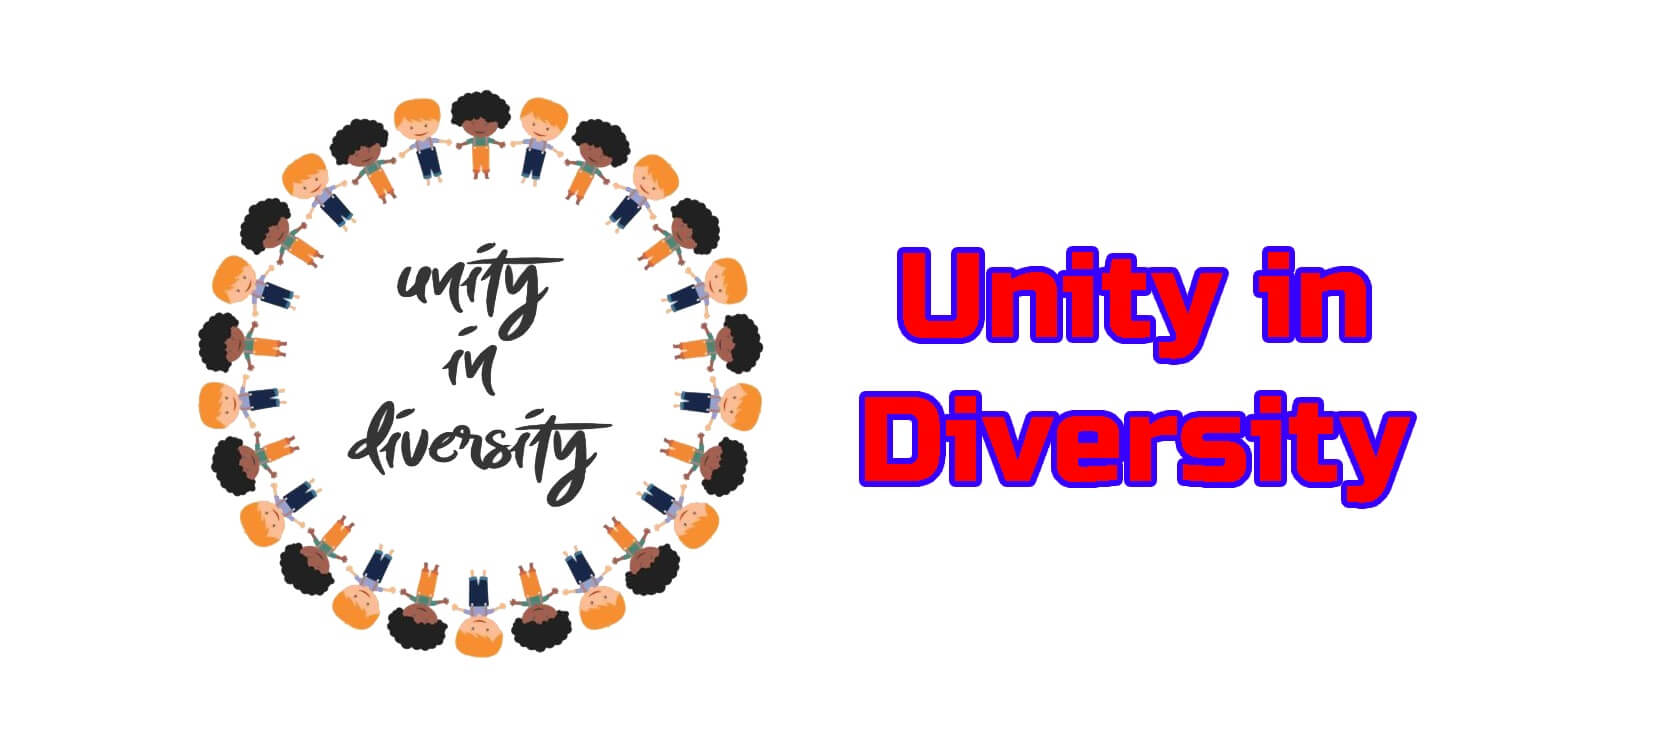 Unity in diversity - Essay for Students